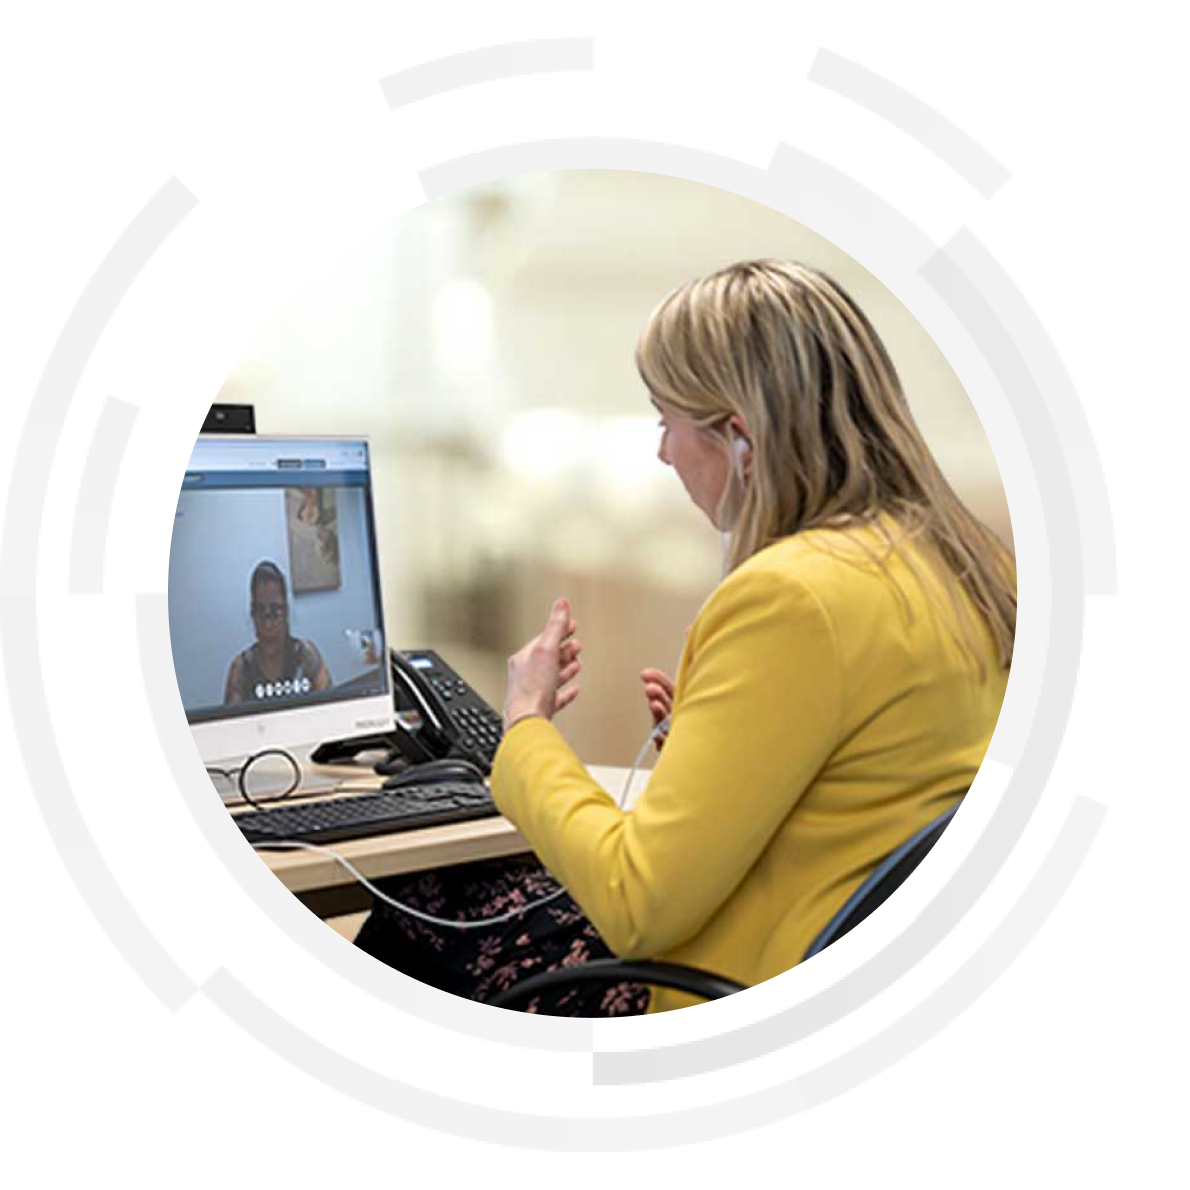 Doctor conducting a virtual consultation with patient on a desktop computer.